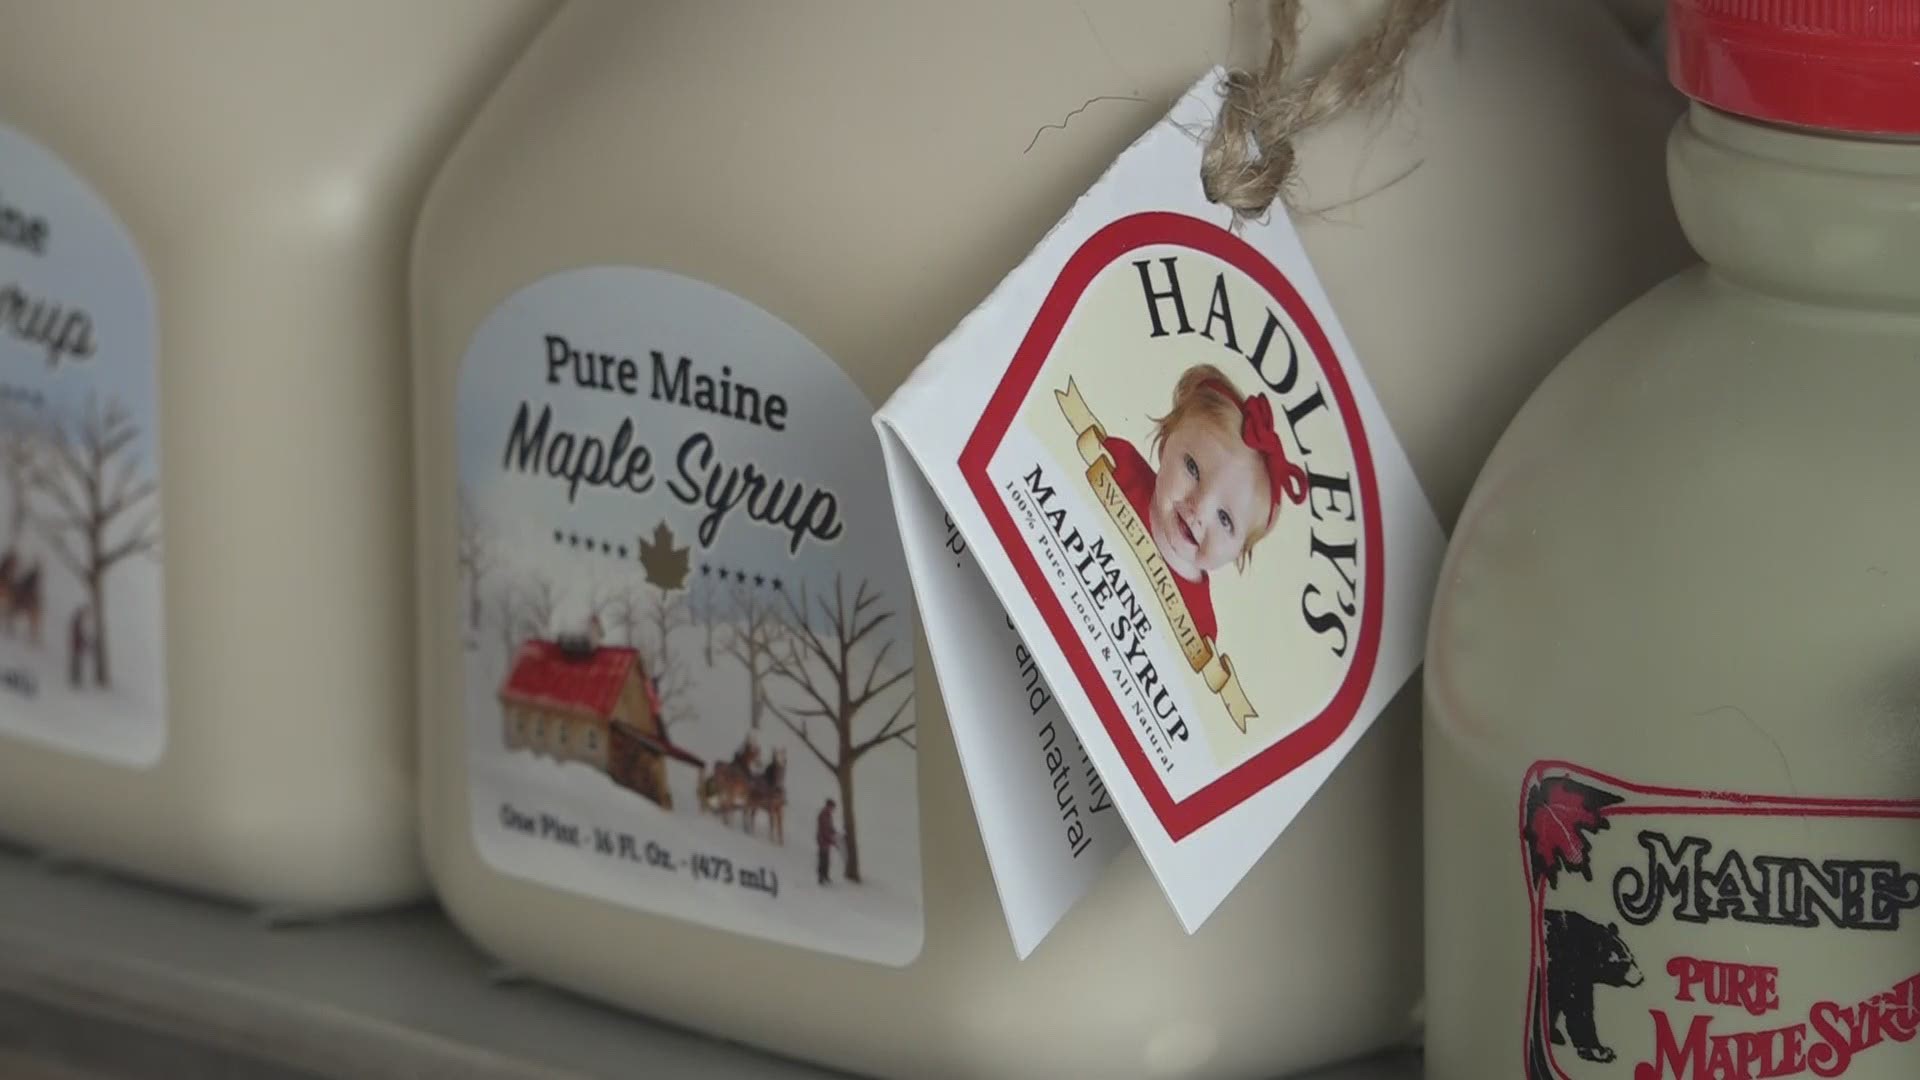 Maine Maple Weekend is happening October 9 to 11 as part of the North American Maple Tour, as a response to coronavirus cancellations earlier this year.